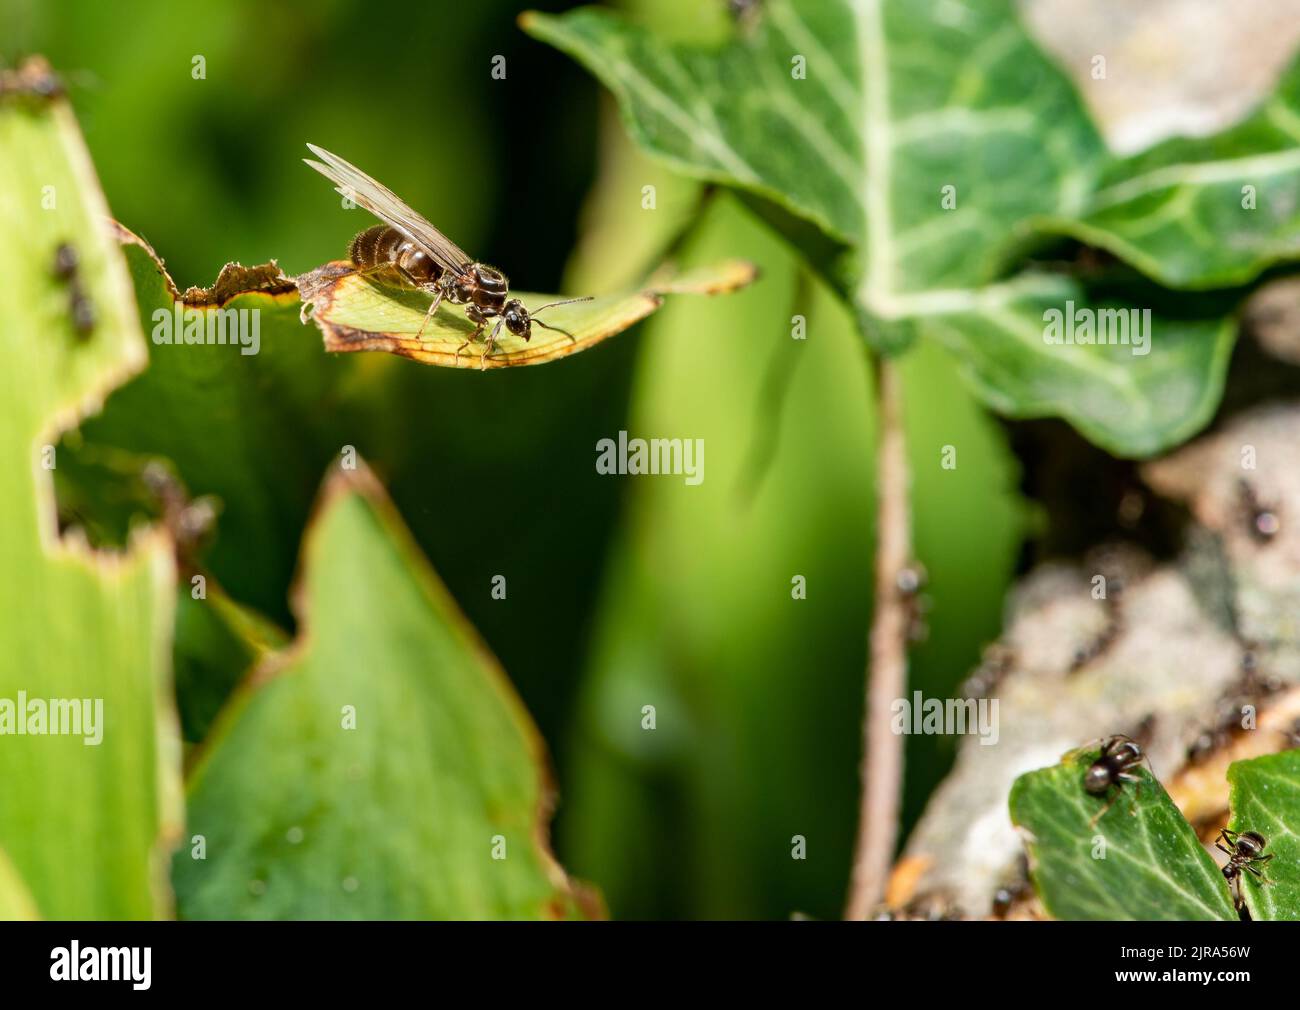 A flying ant in a garden, Chipping, Preston, Lancashire, UK Stock Photo